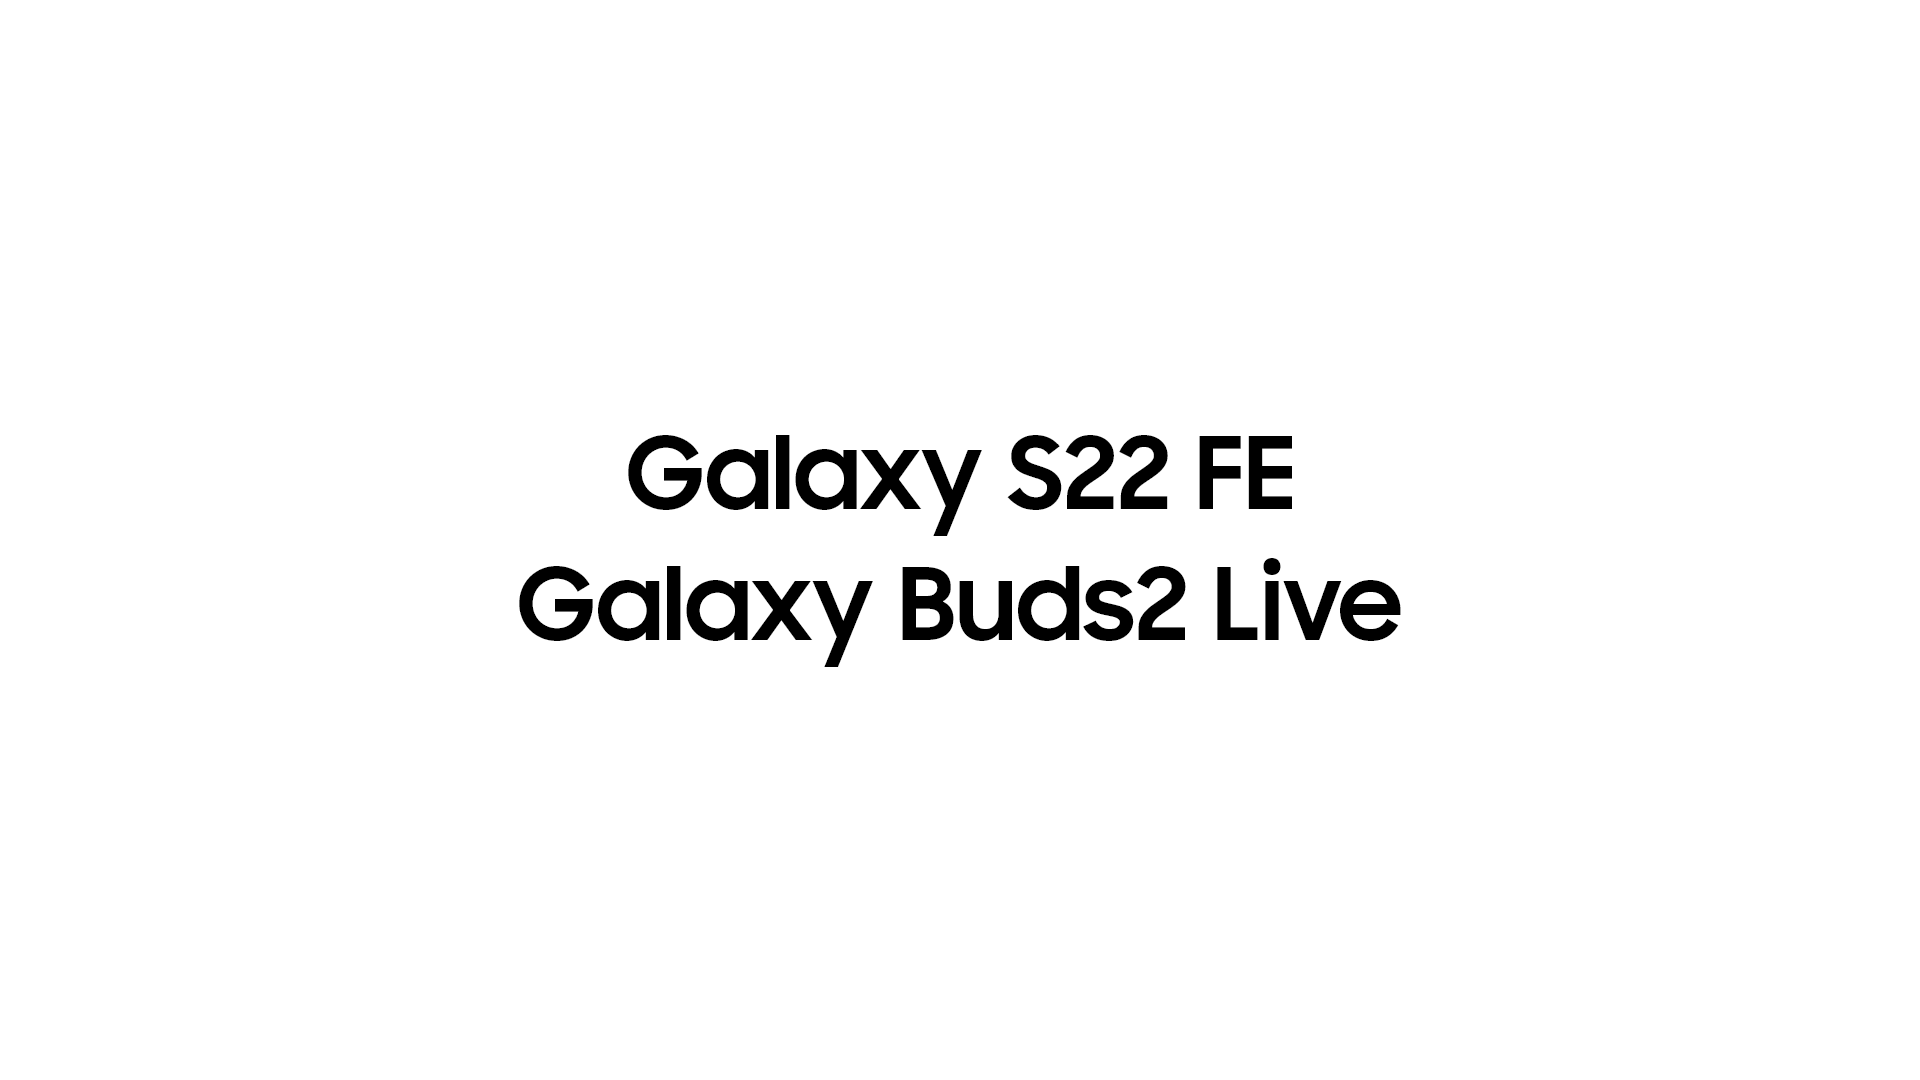 The new Galaxy Buds Live are expected to join the rumored Galaxy S22 FE at a launch event this spring.  - Samsung's best kept secret.  A cheaper flagship phone than the Galaxy S23 coming soon?